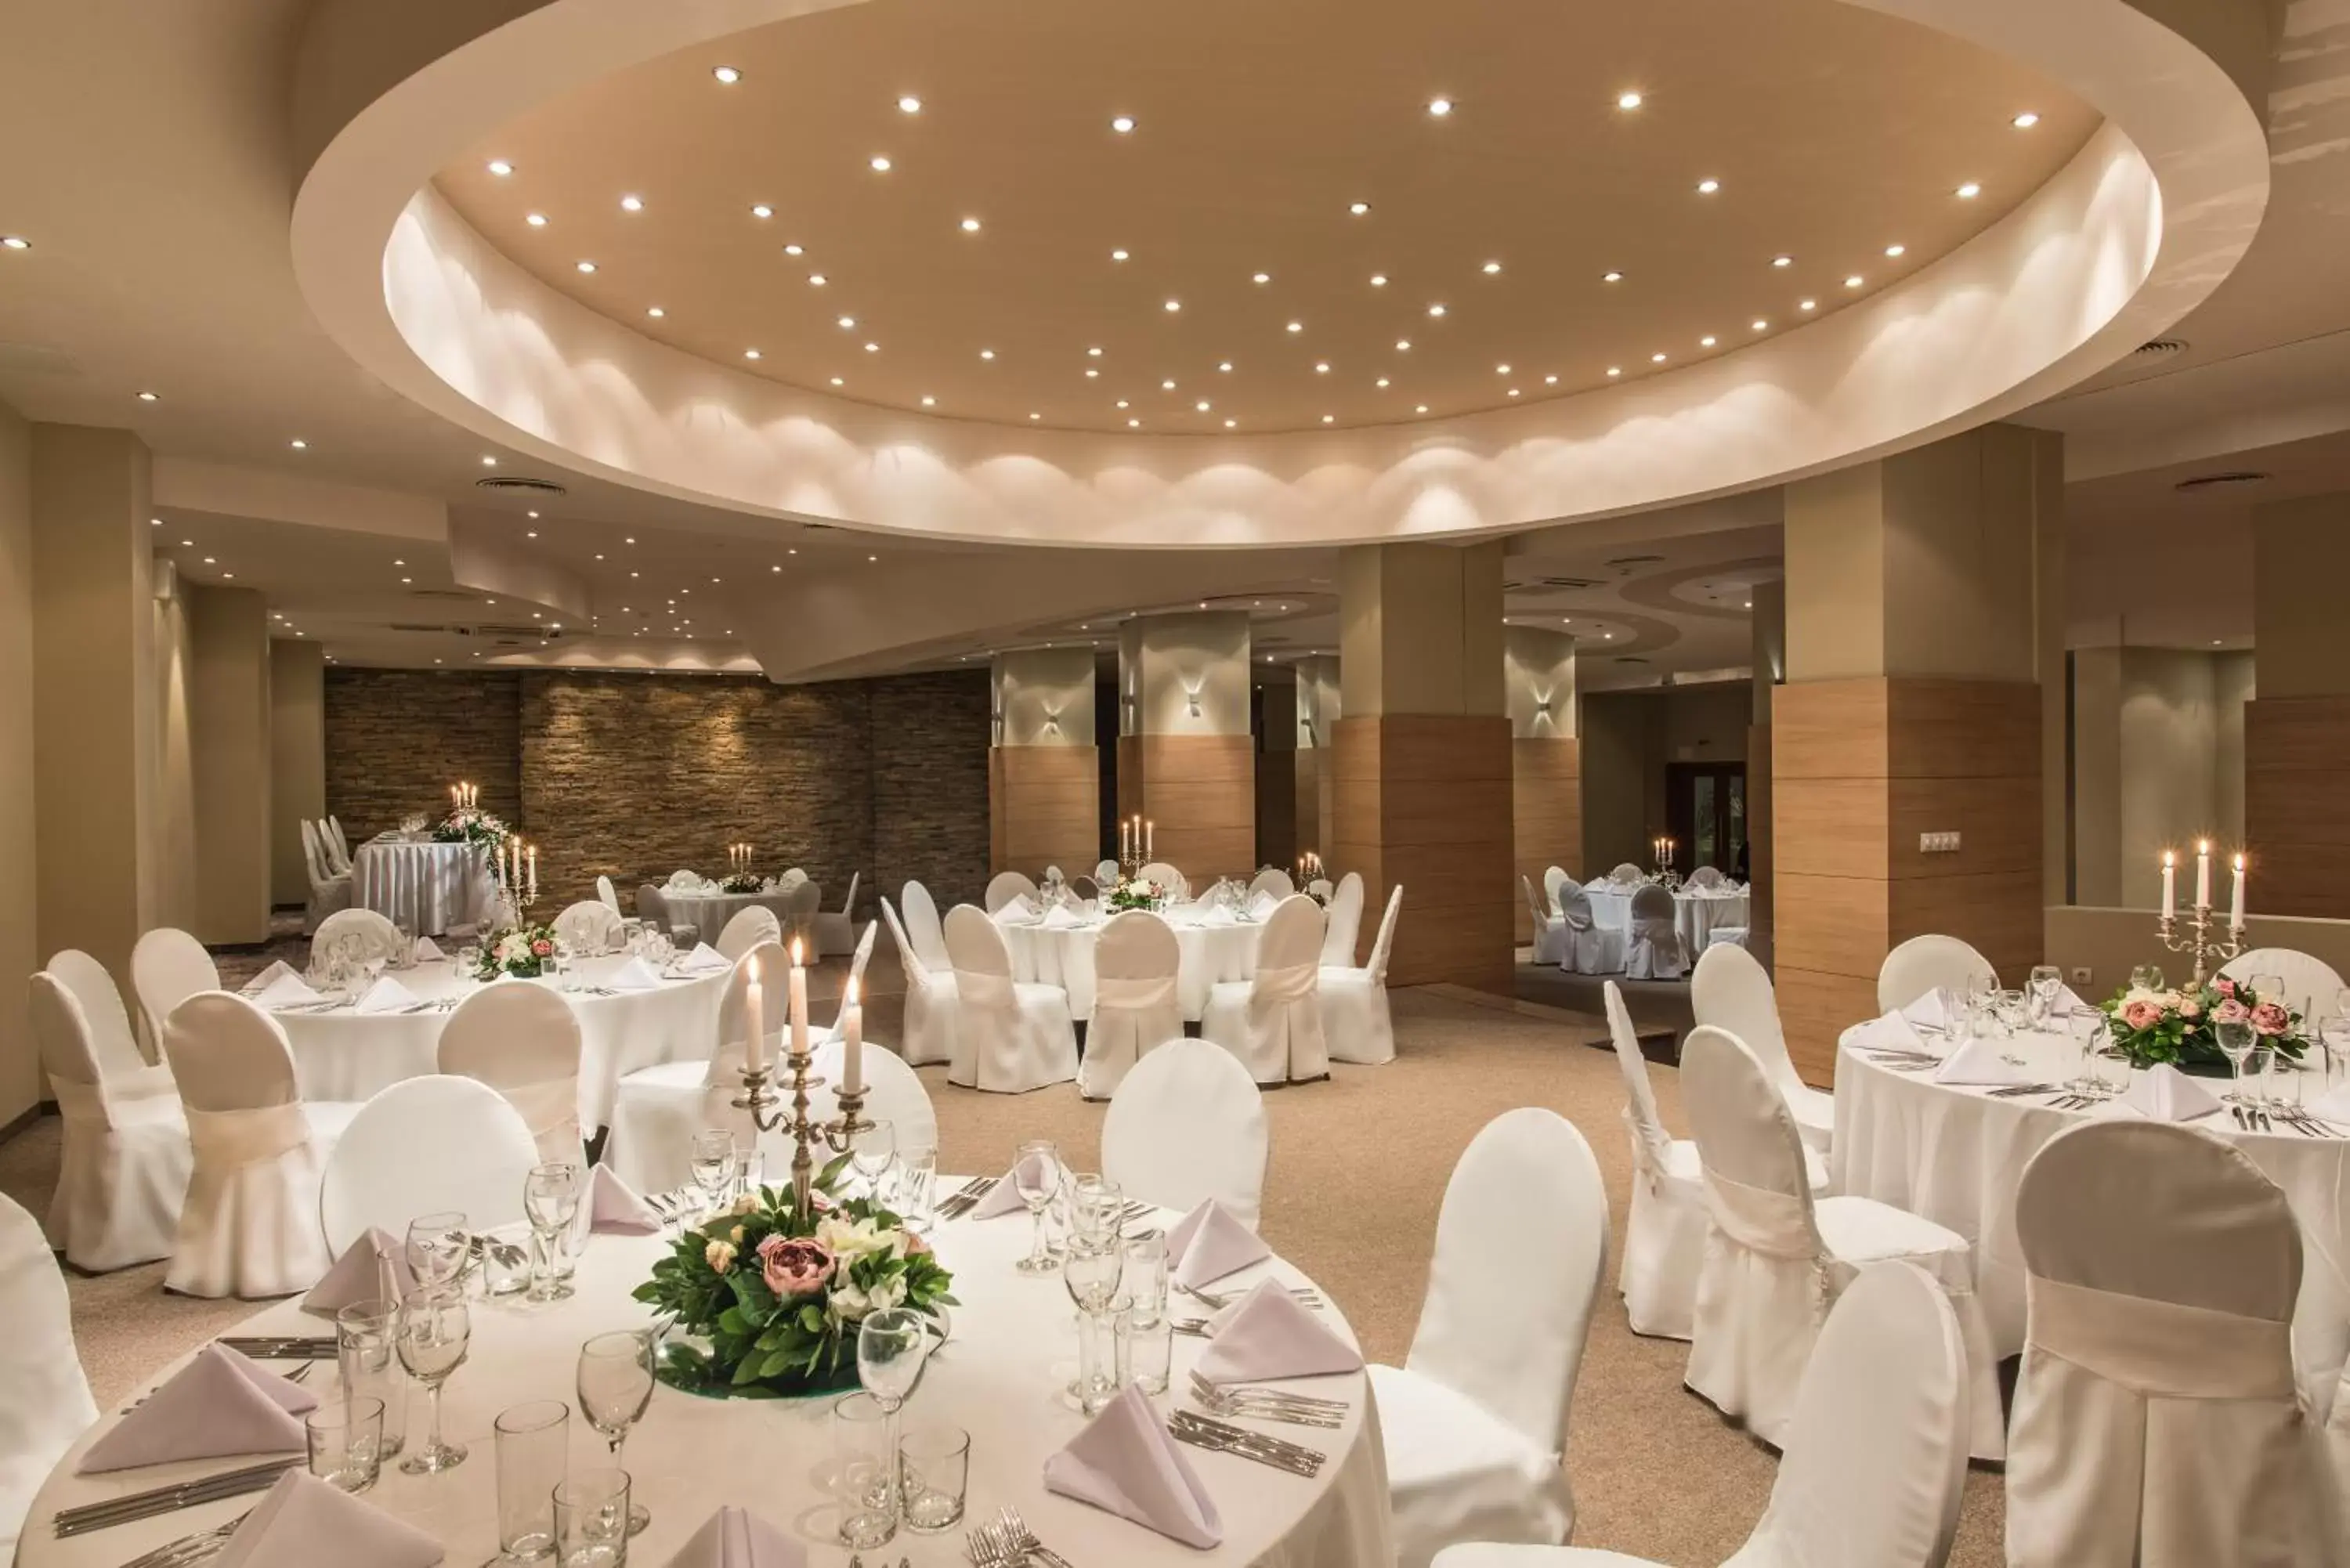 Banquet/Function facilities, Banquet Facilities in Expo Sofia Hotel - Free Arrival shuttle bus - Free Parking - Free Compliments - Free Wi-Fi